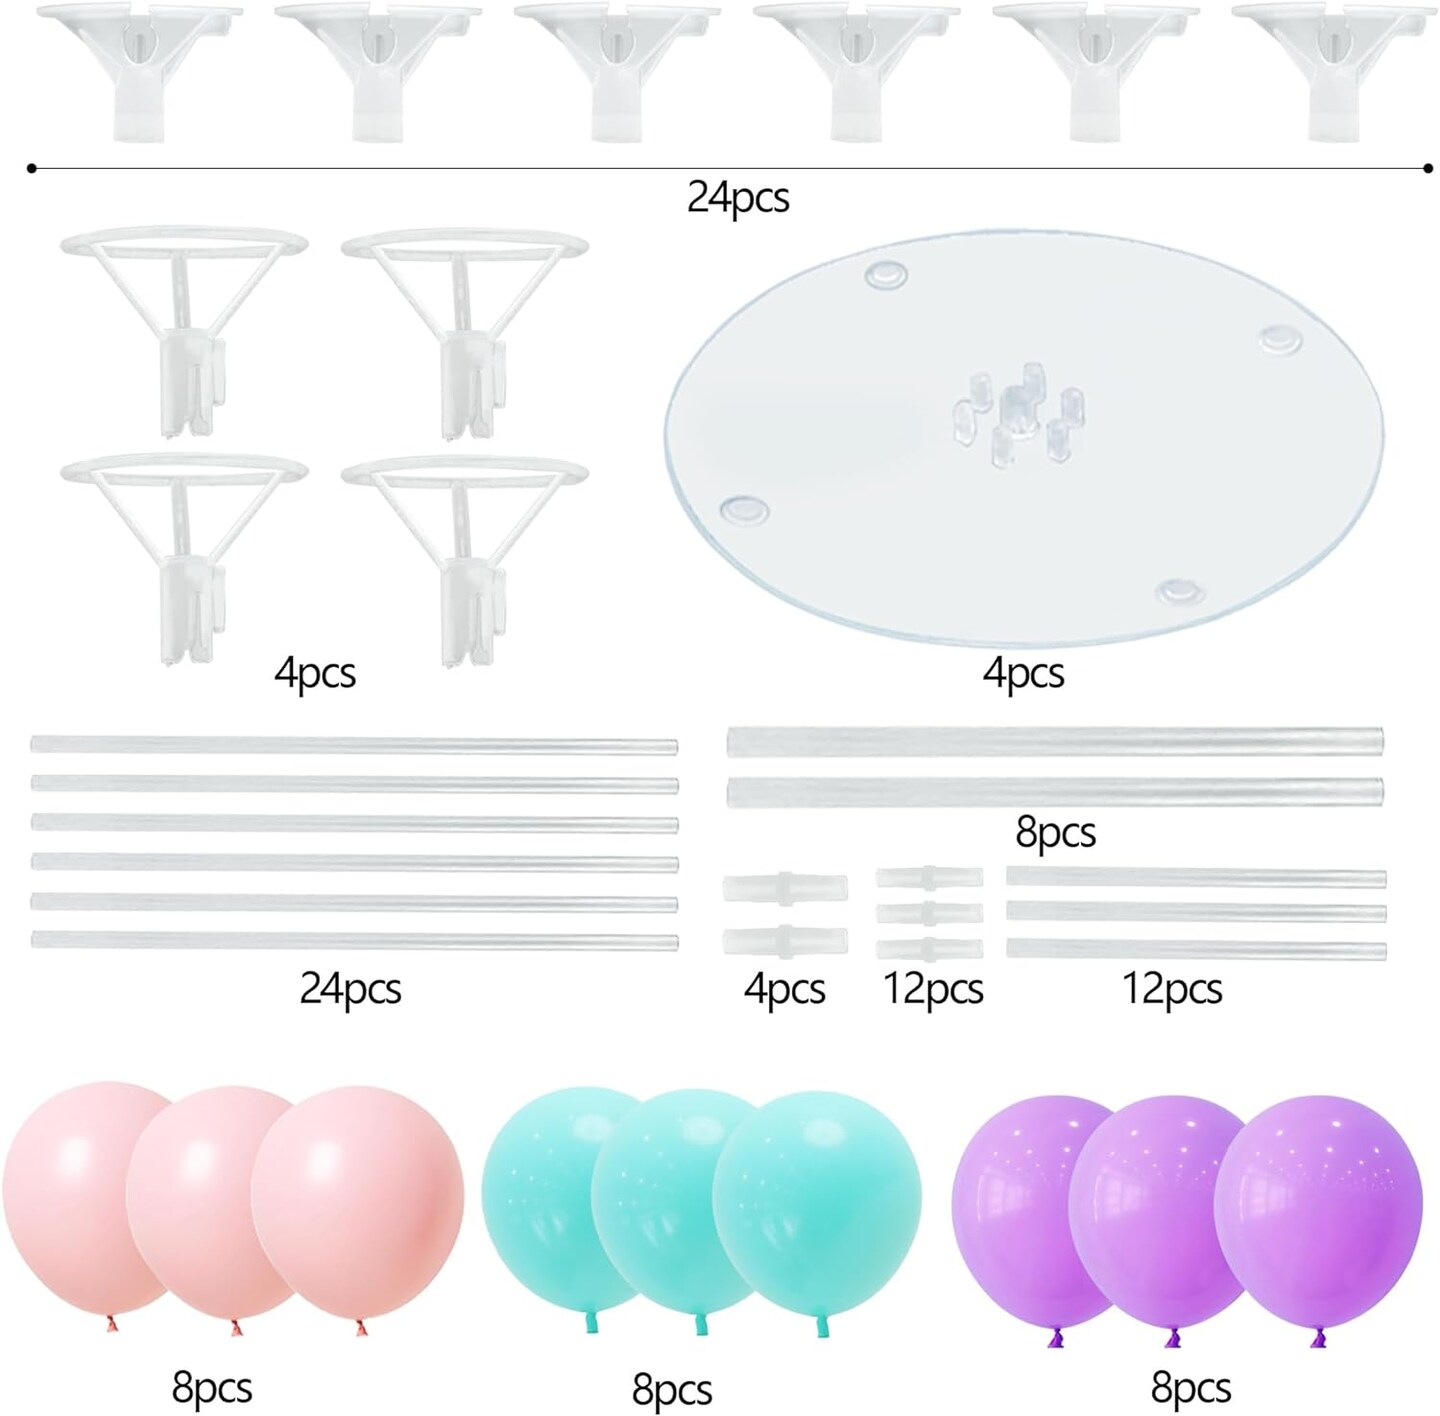 Balloon Centerpieces Stands For Tables Birthday Party Decorations Supplies For Girls With Pastel Balloons